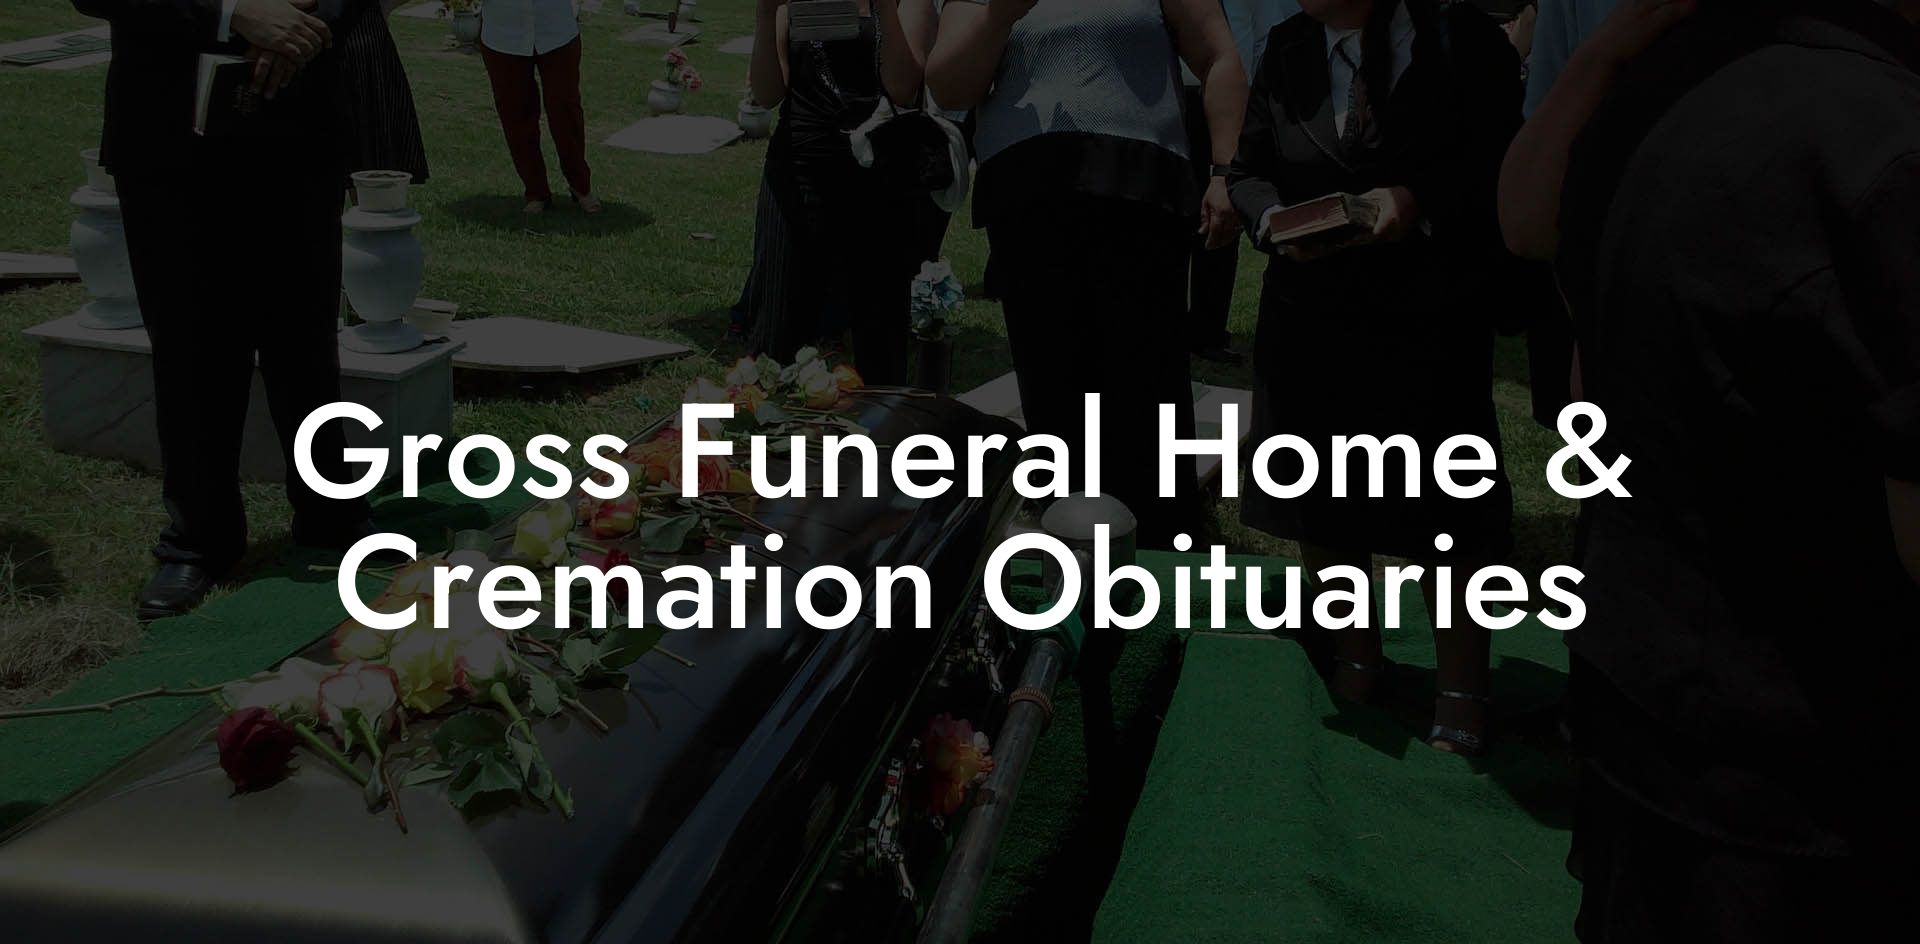 Gross Funeral Home & Cremation Obituaries - Eulogy Assistant